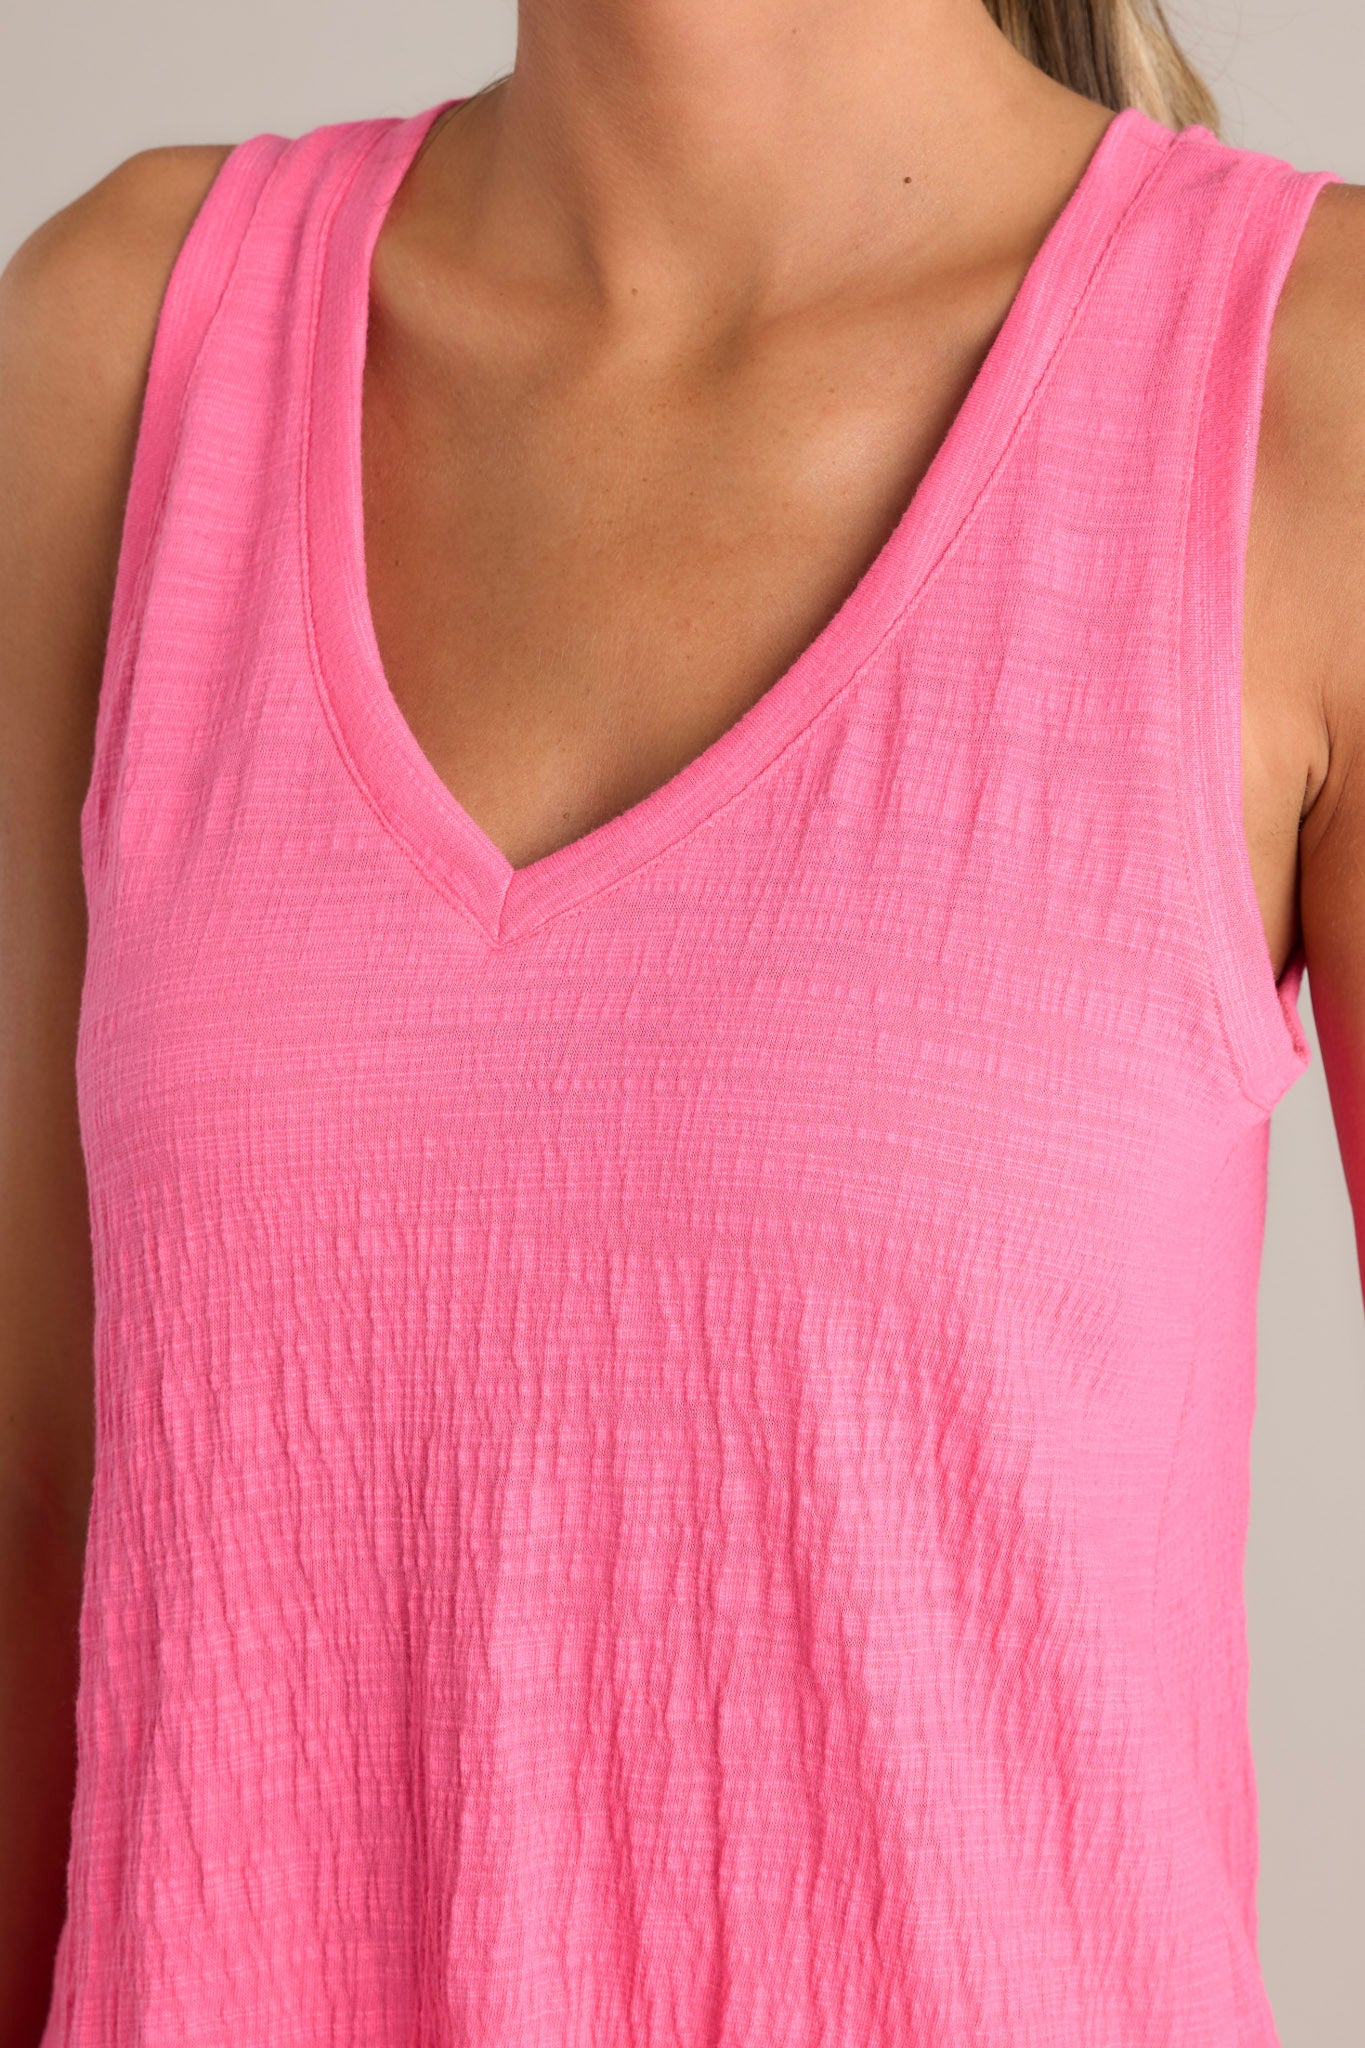 A detailed close-up of the pink tank top's fabric, focusing on the textured material and stitching near the neckline.